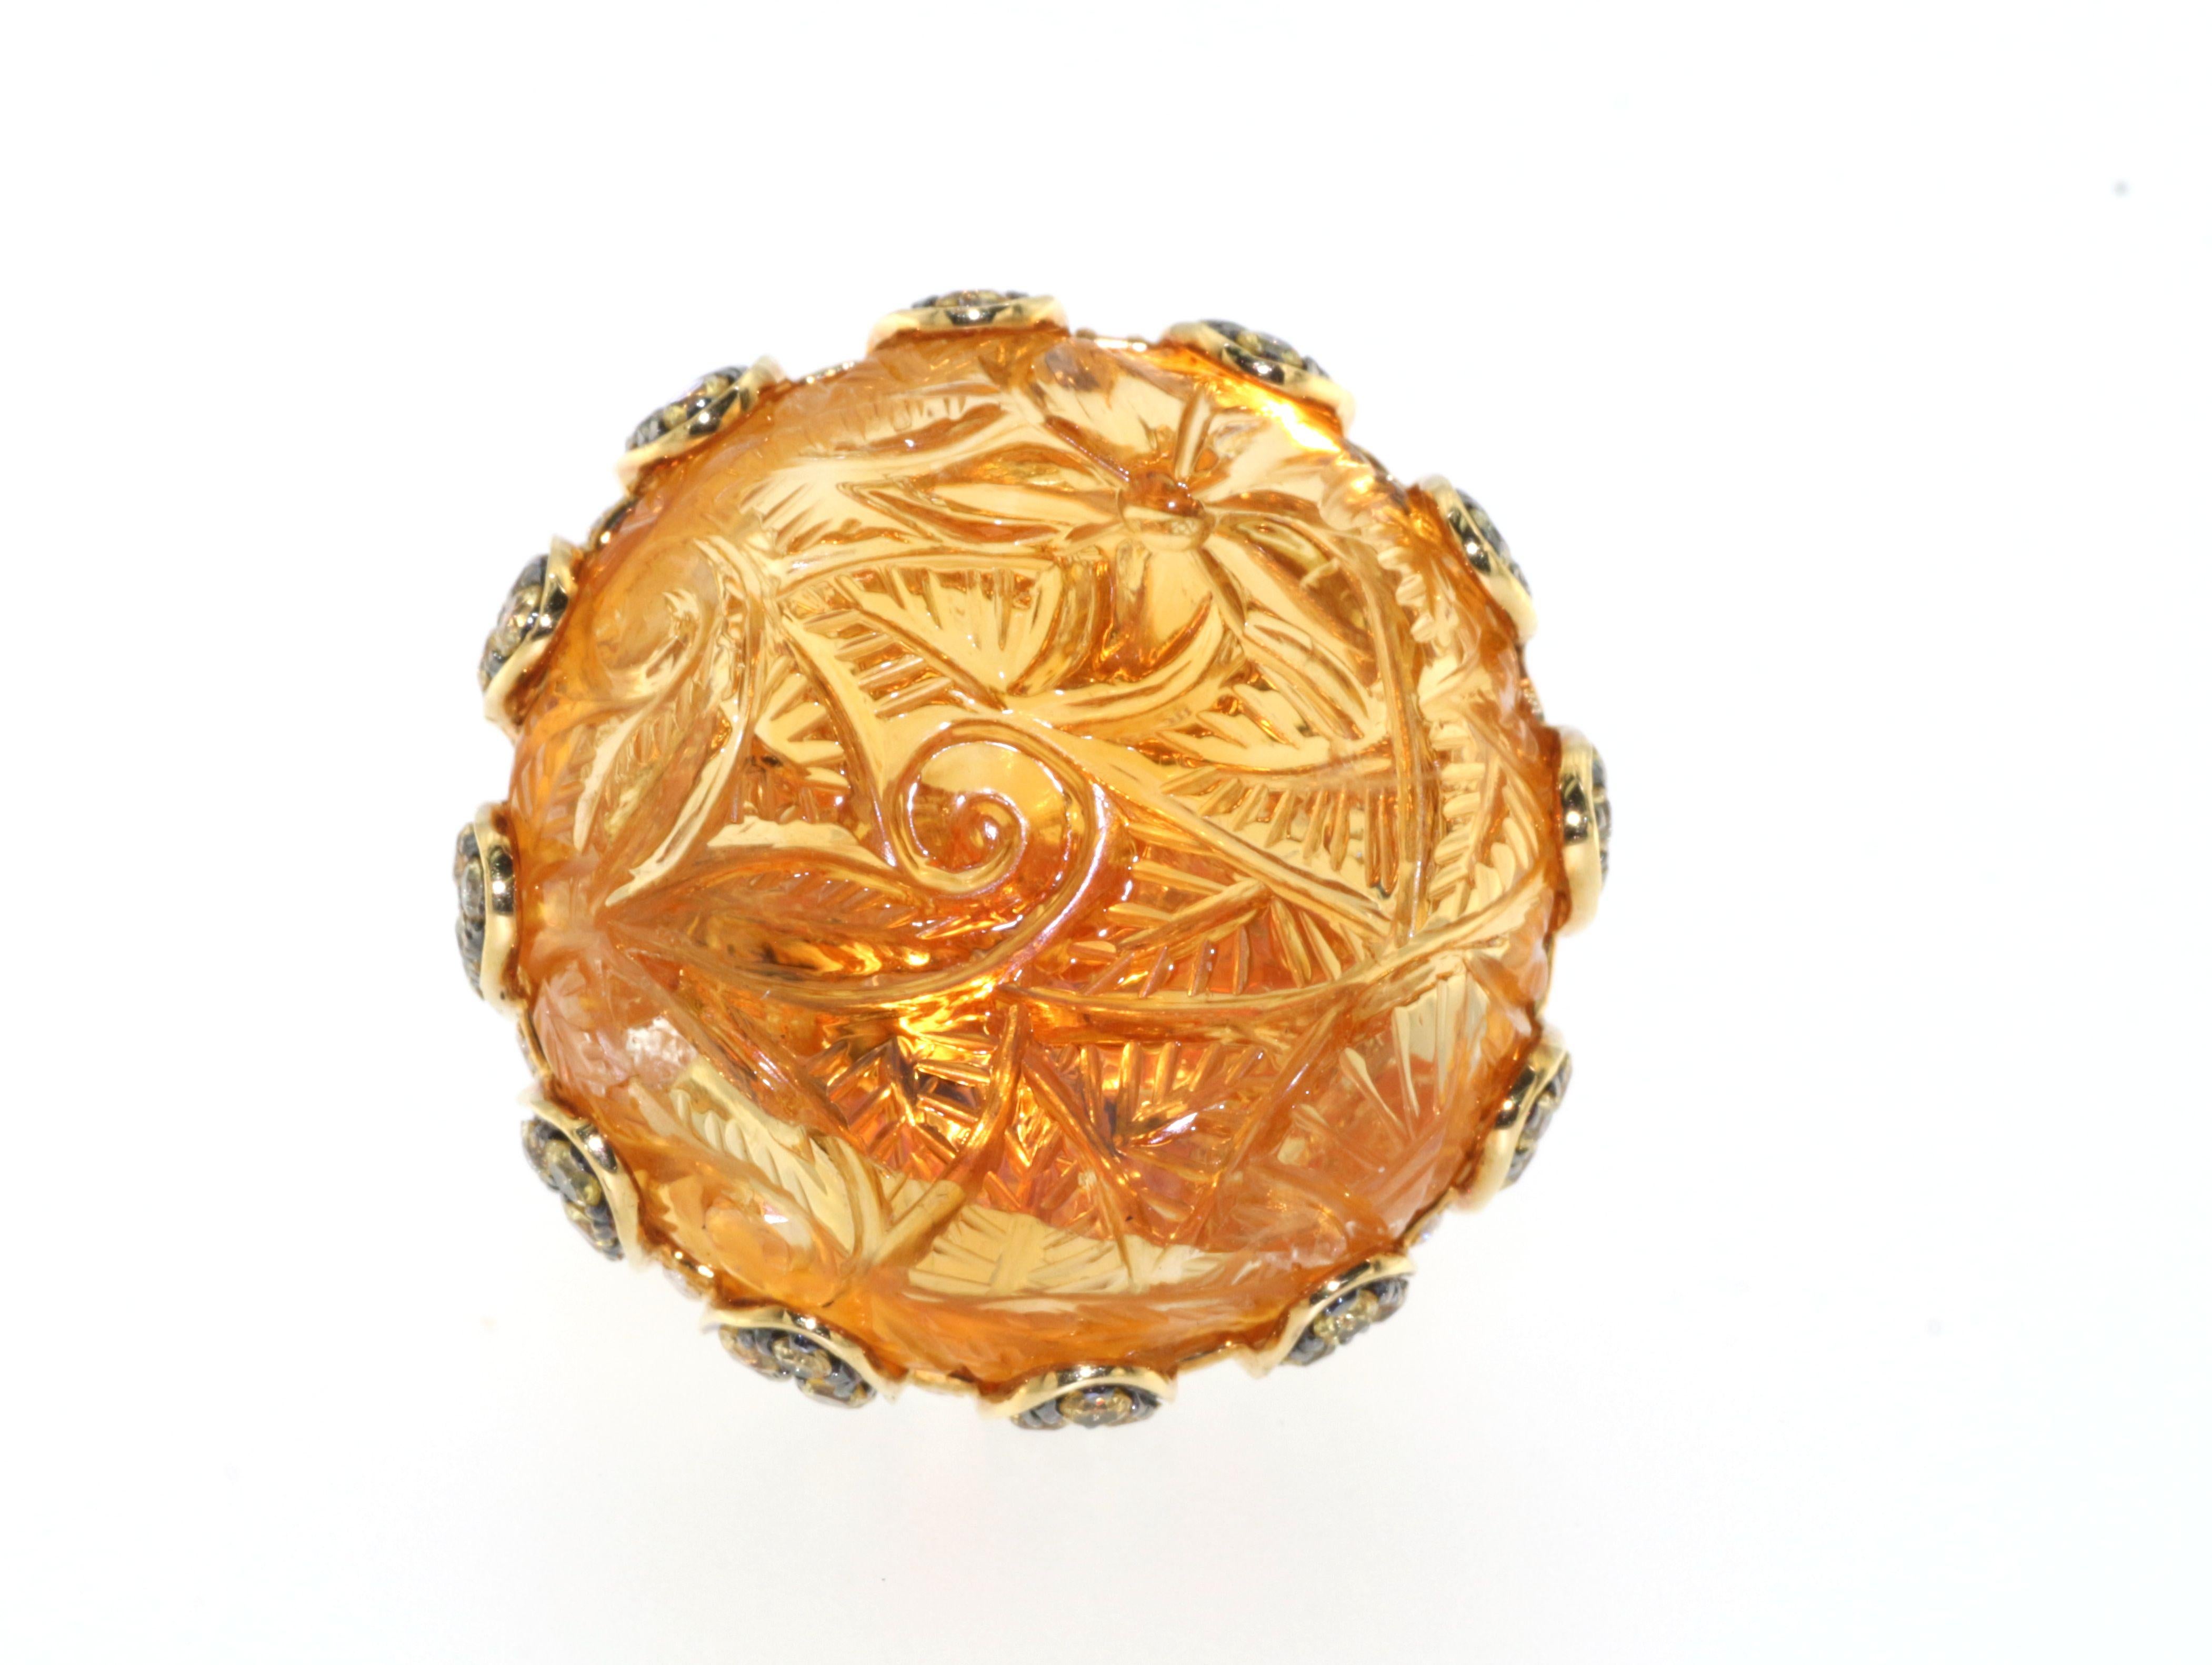 Introducing a stunning 46Ct Carved Citrine Yellow Sapphire and Diamond Cocktail Ring in 18kt Yellow Gold, perfect for adding a bold and beautiful statement to any outfit. The exquisite carved citrine centerpiece is surrounded by an array of vibrant